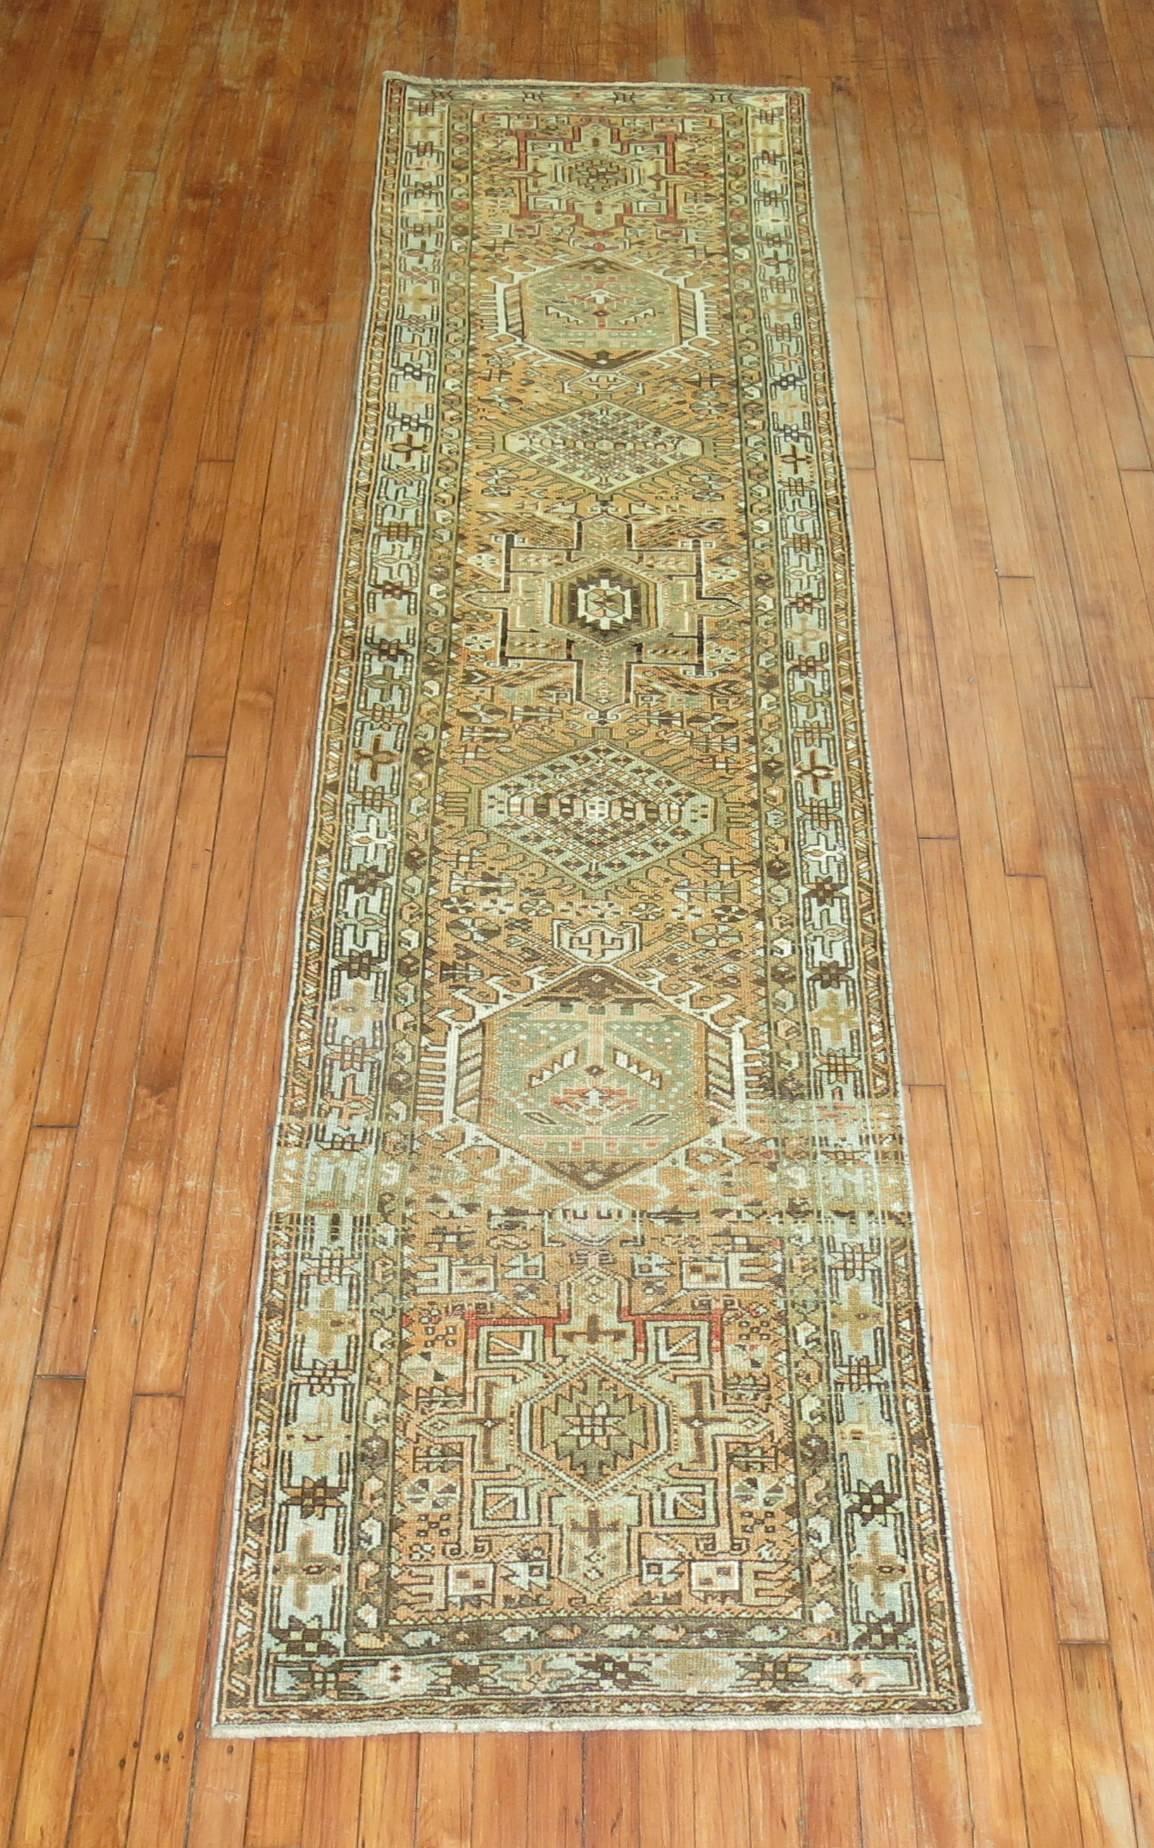 Decorative Persian Heriz one of a kind antique runner.

2'8'' x 10'8''